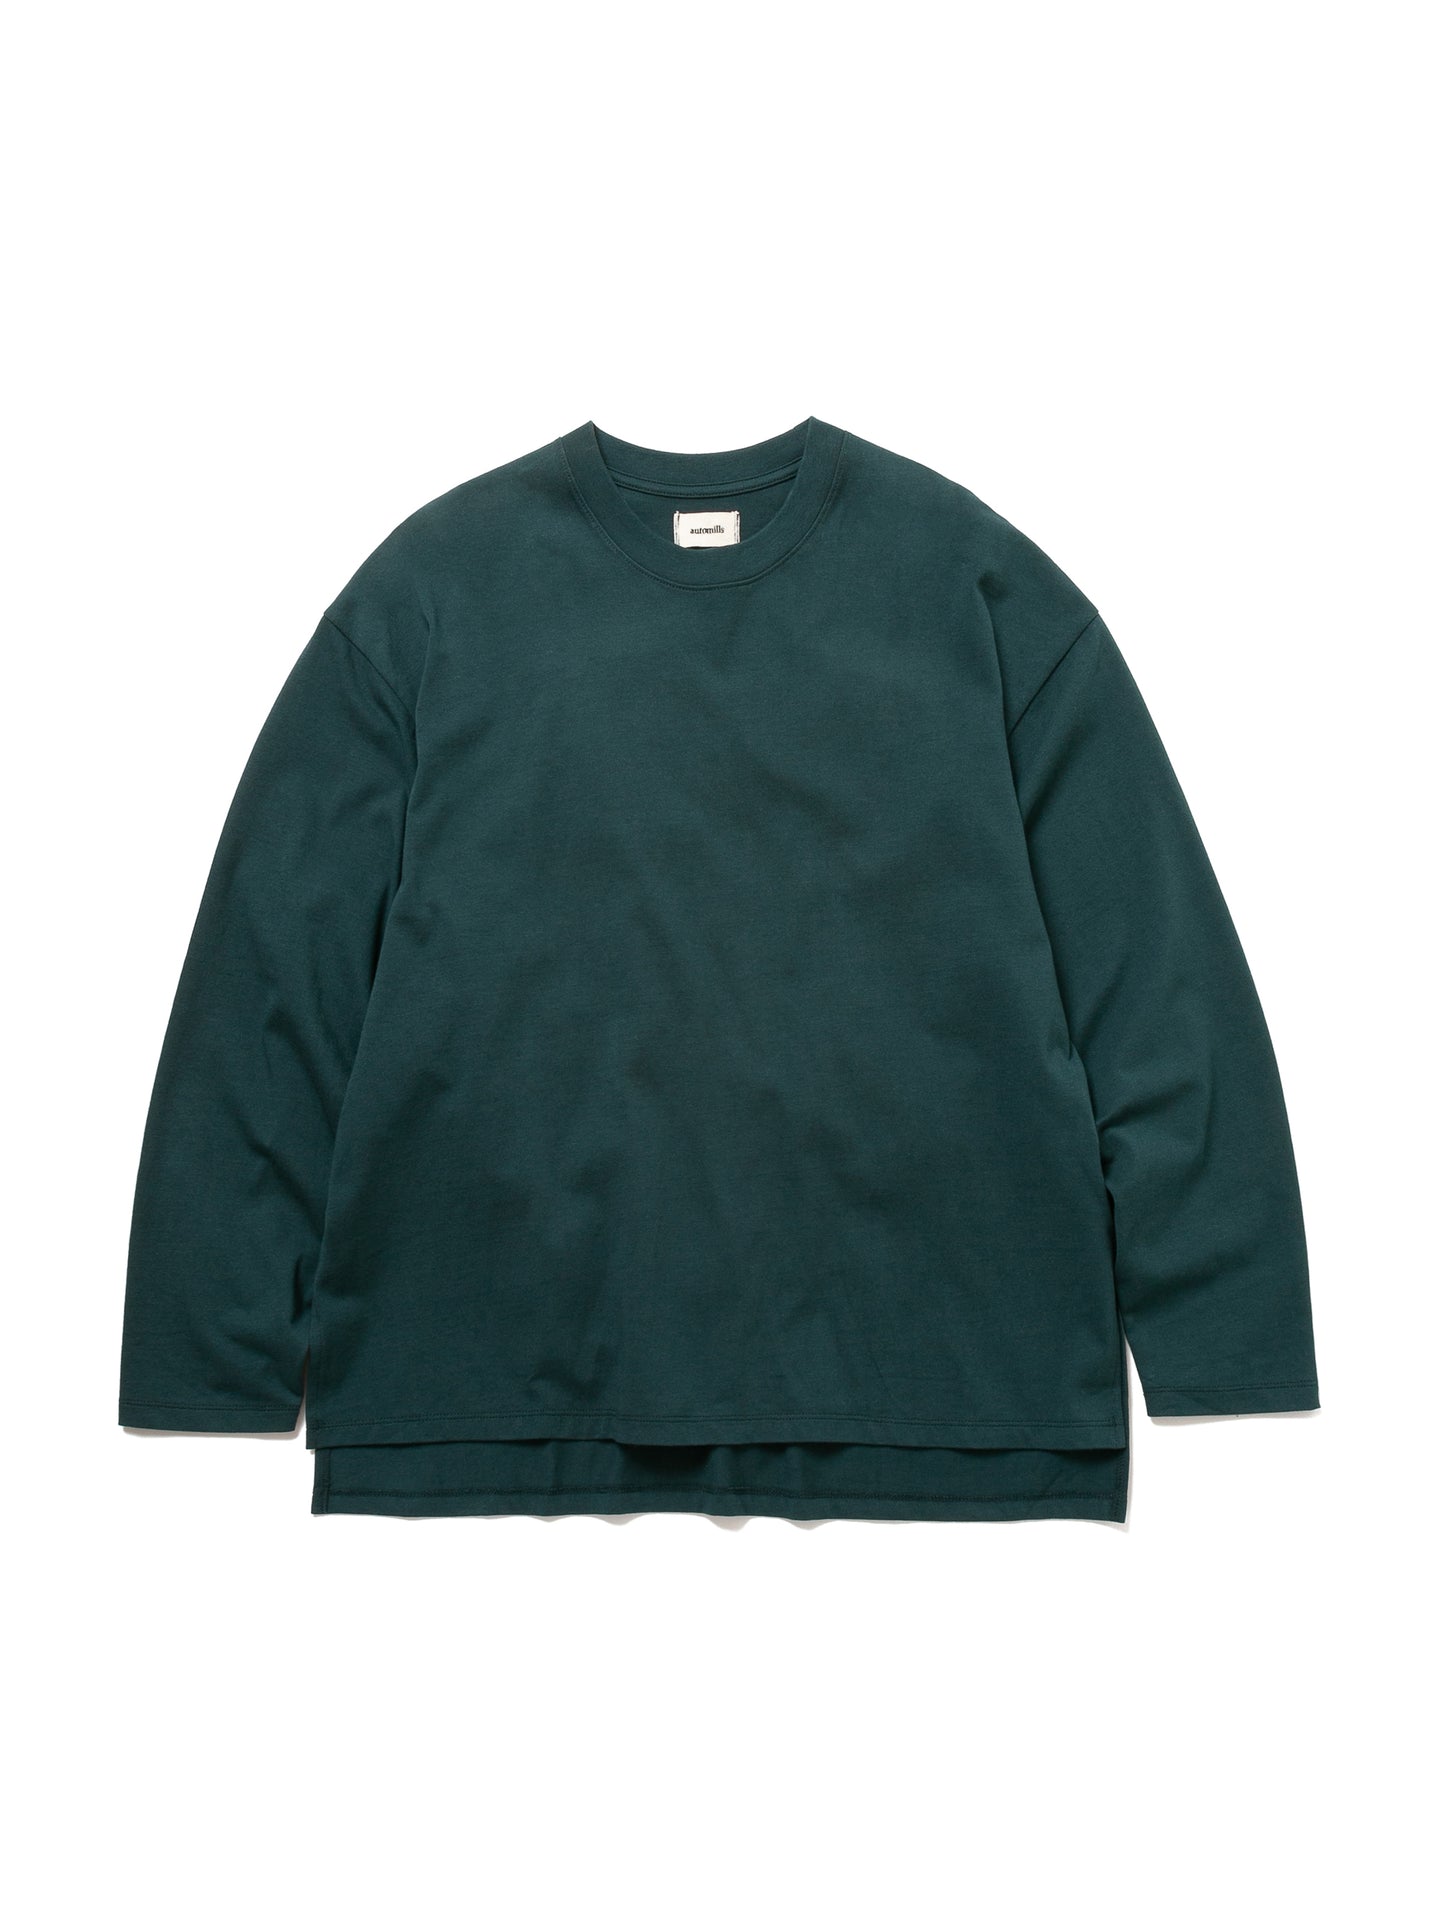 BAGGY L/S TEE ORGANIC COTTON JERSEY AM-C0003 Forest